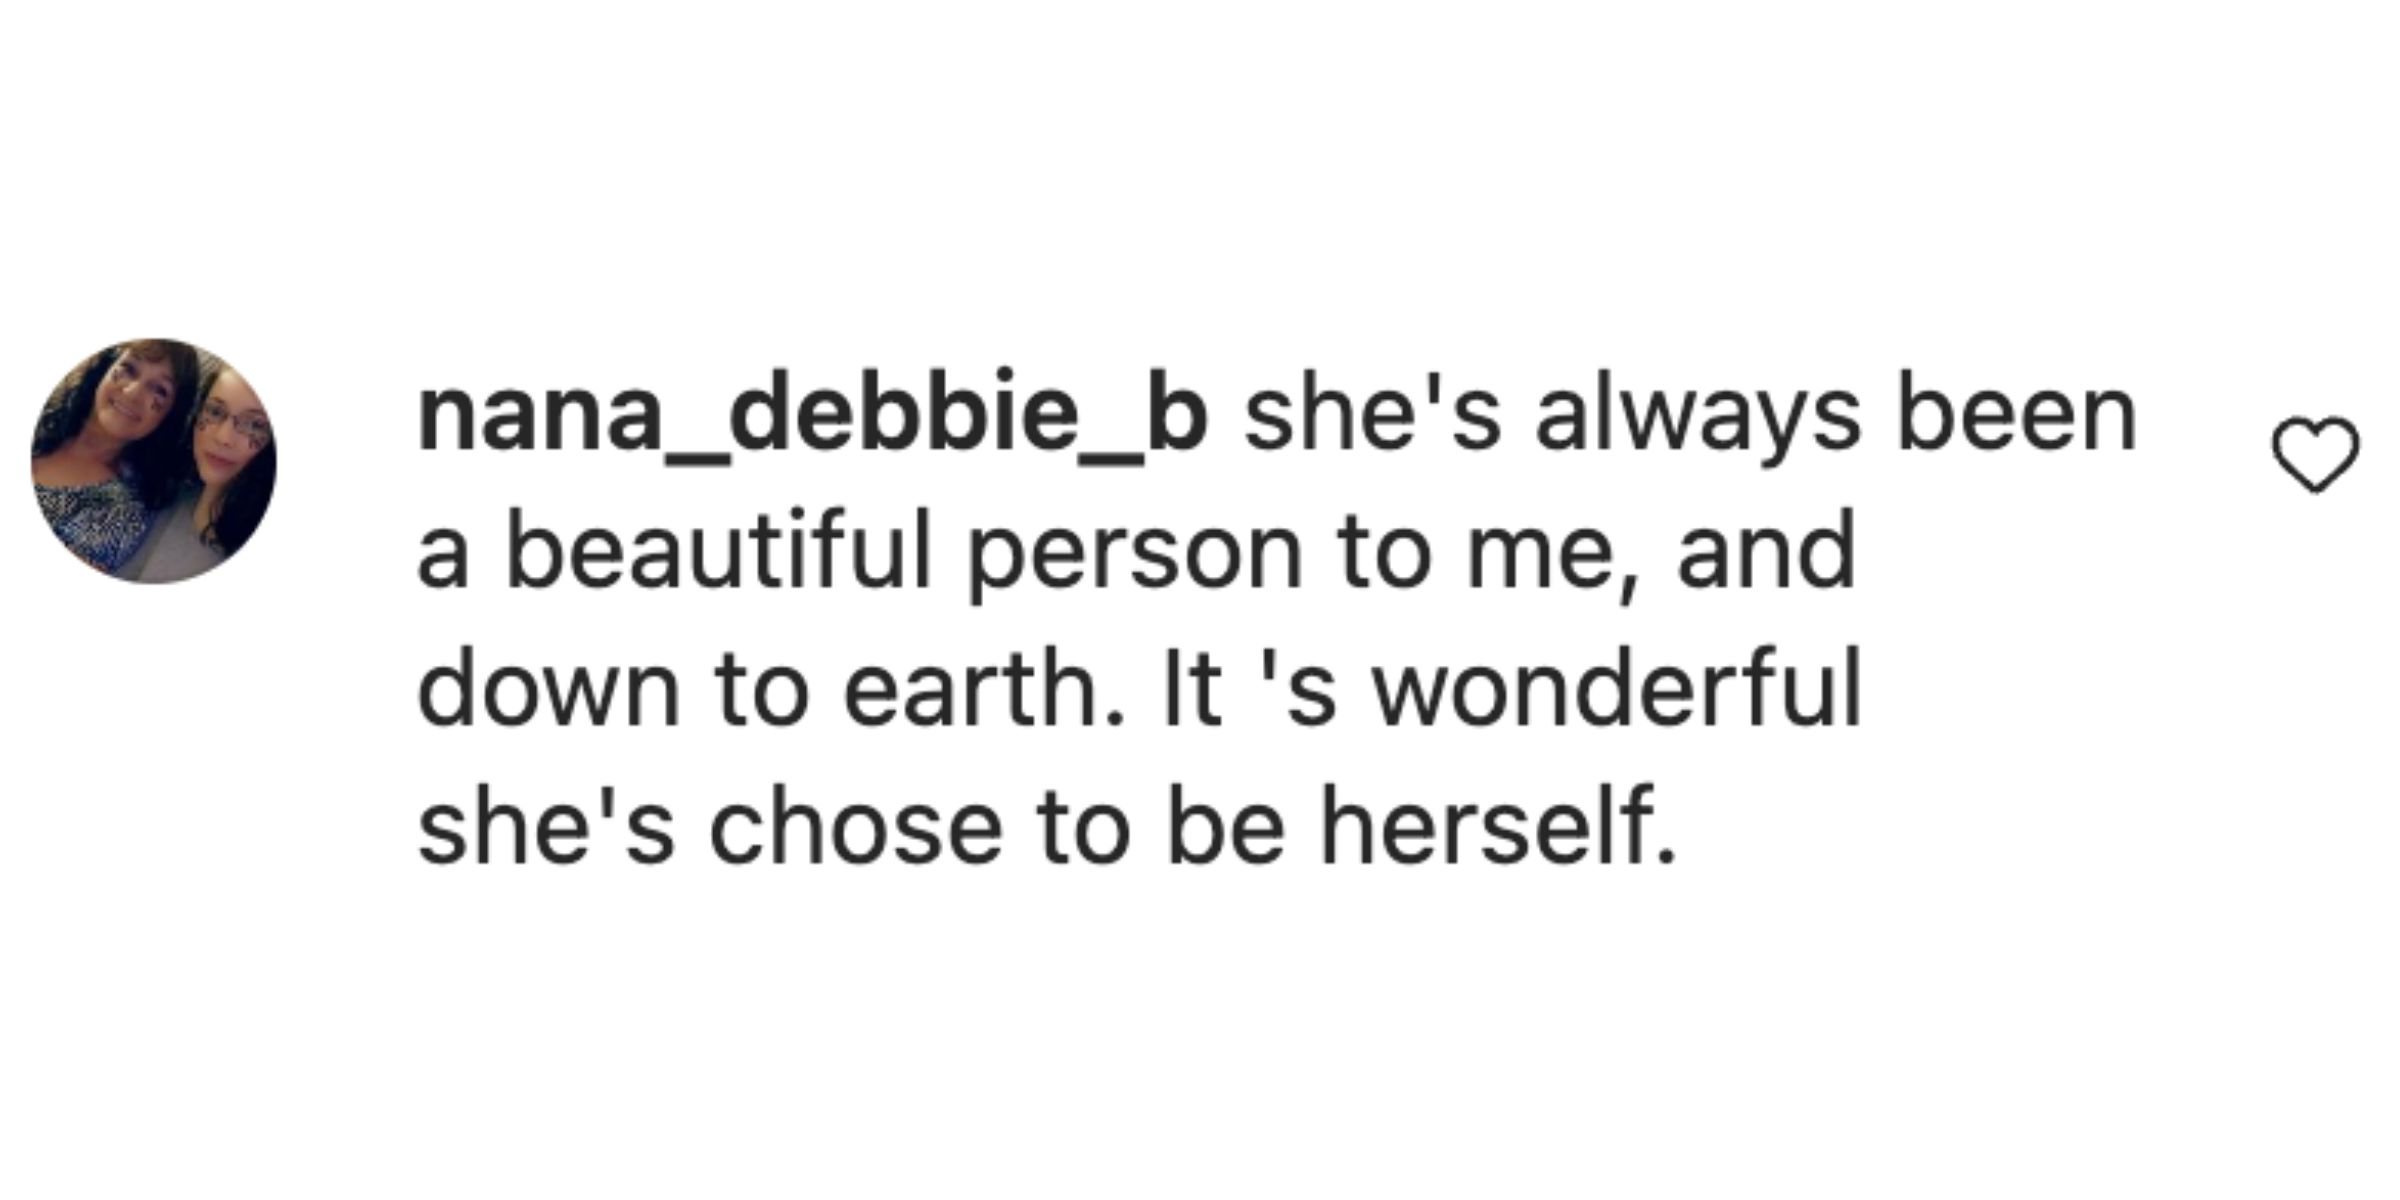 A fan's comment on Jamie Lee Curtis' Instagram post on March 11, 2022. | Source: Instagram/curtisleejamie